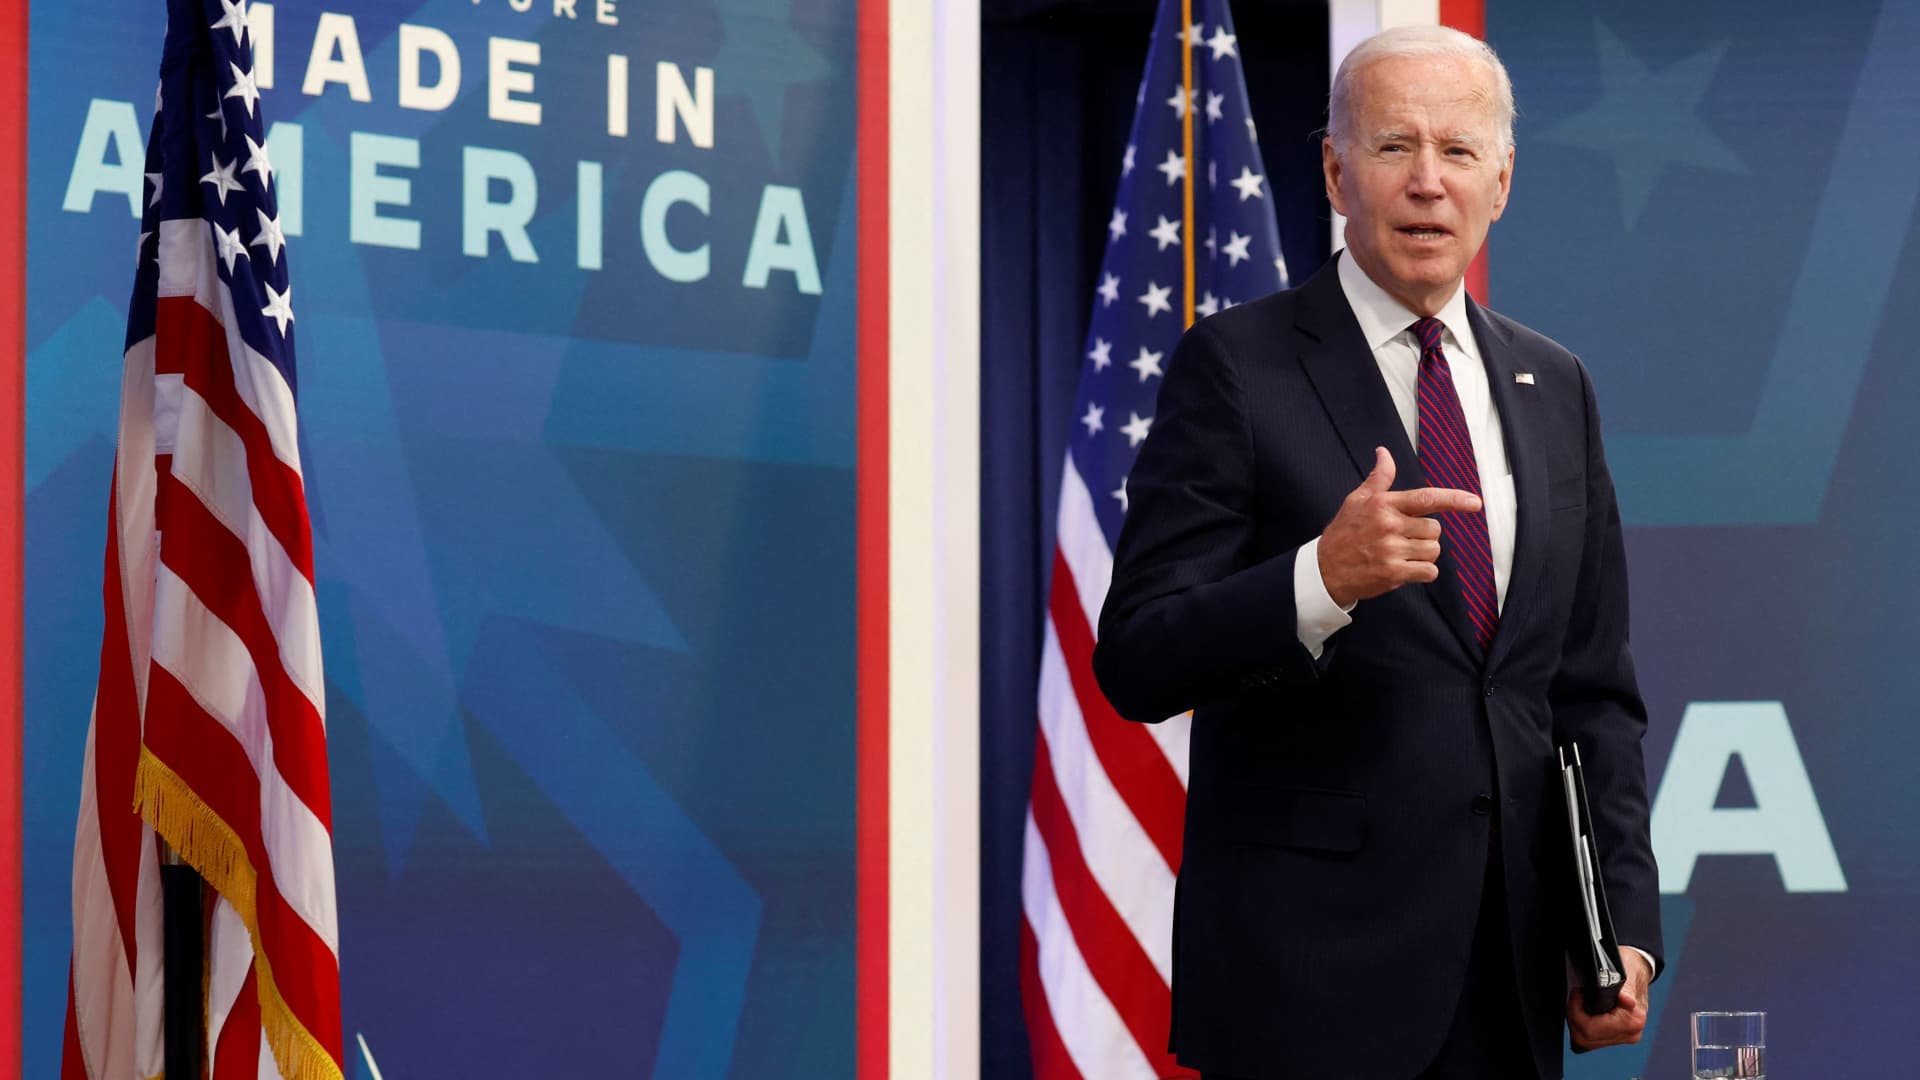 U.S. President Joe Biden speaks to reporters after an event to discuss his “American Rescue Plan” investments in regional communities, at an auditorium on the White House campus in Washington, U.S. September 2, 2022.